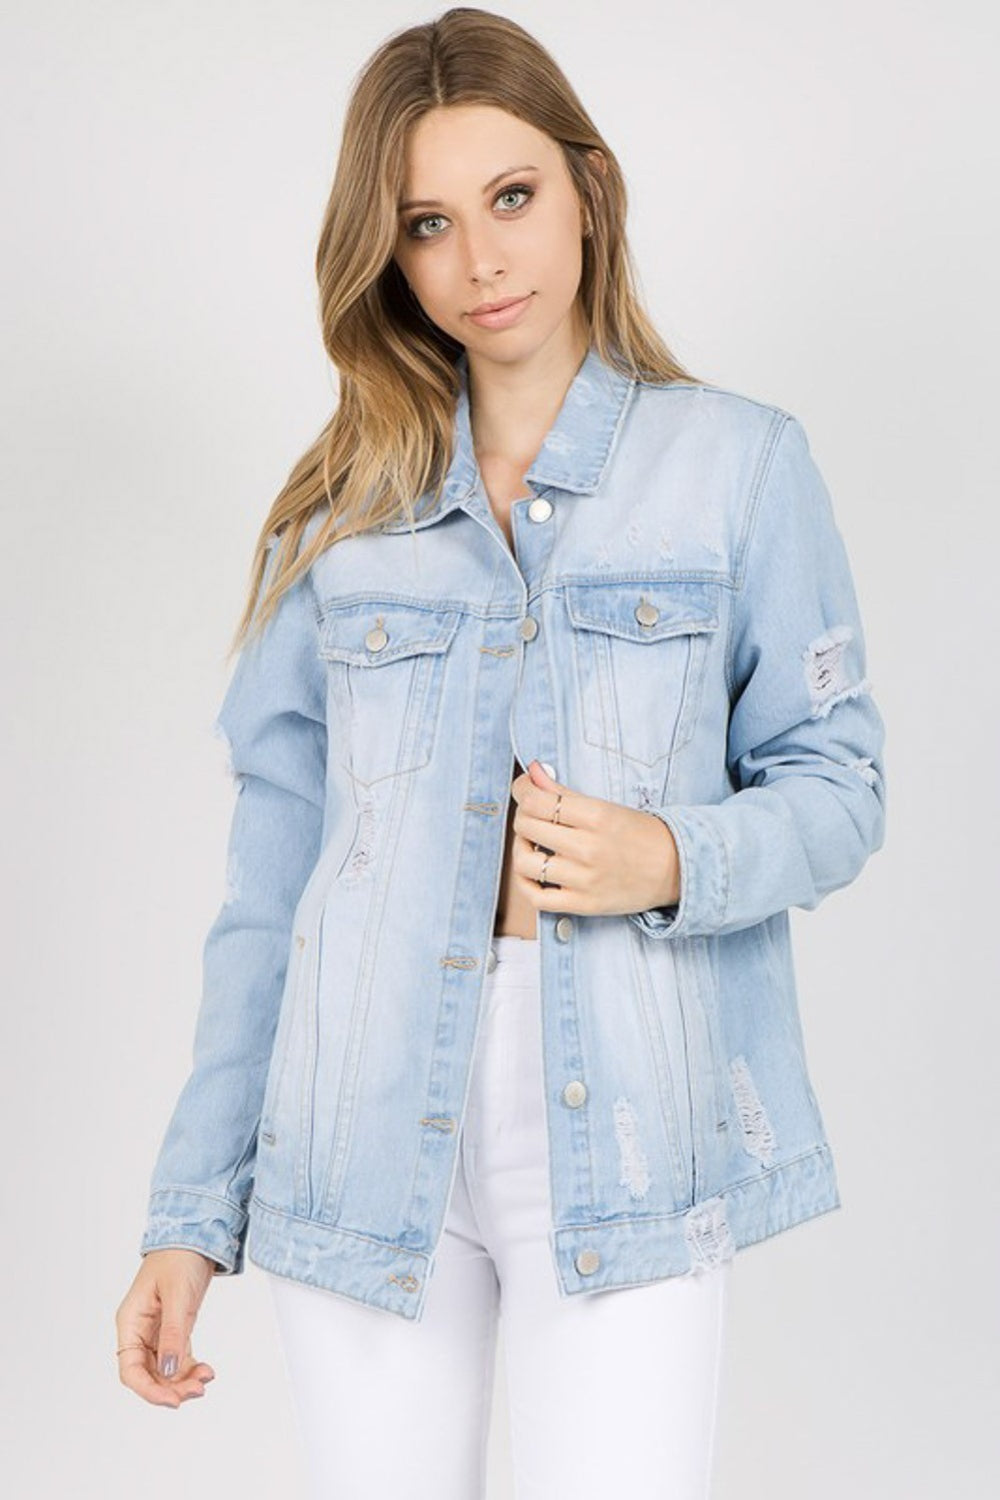 Bang-Up American Bazi Letter Patched Distressed Denim Jacket